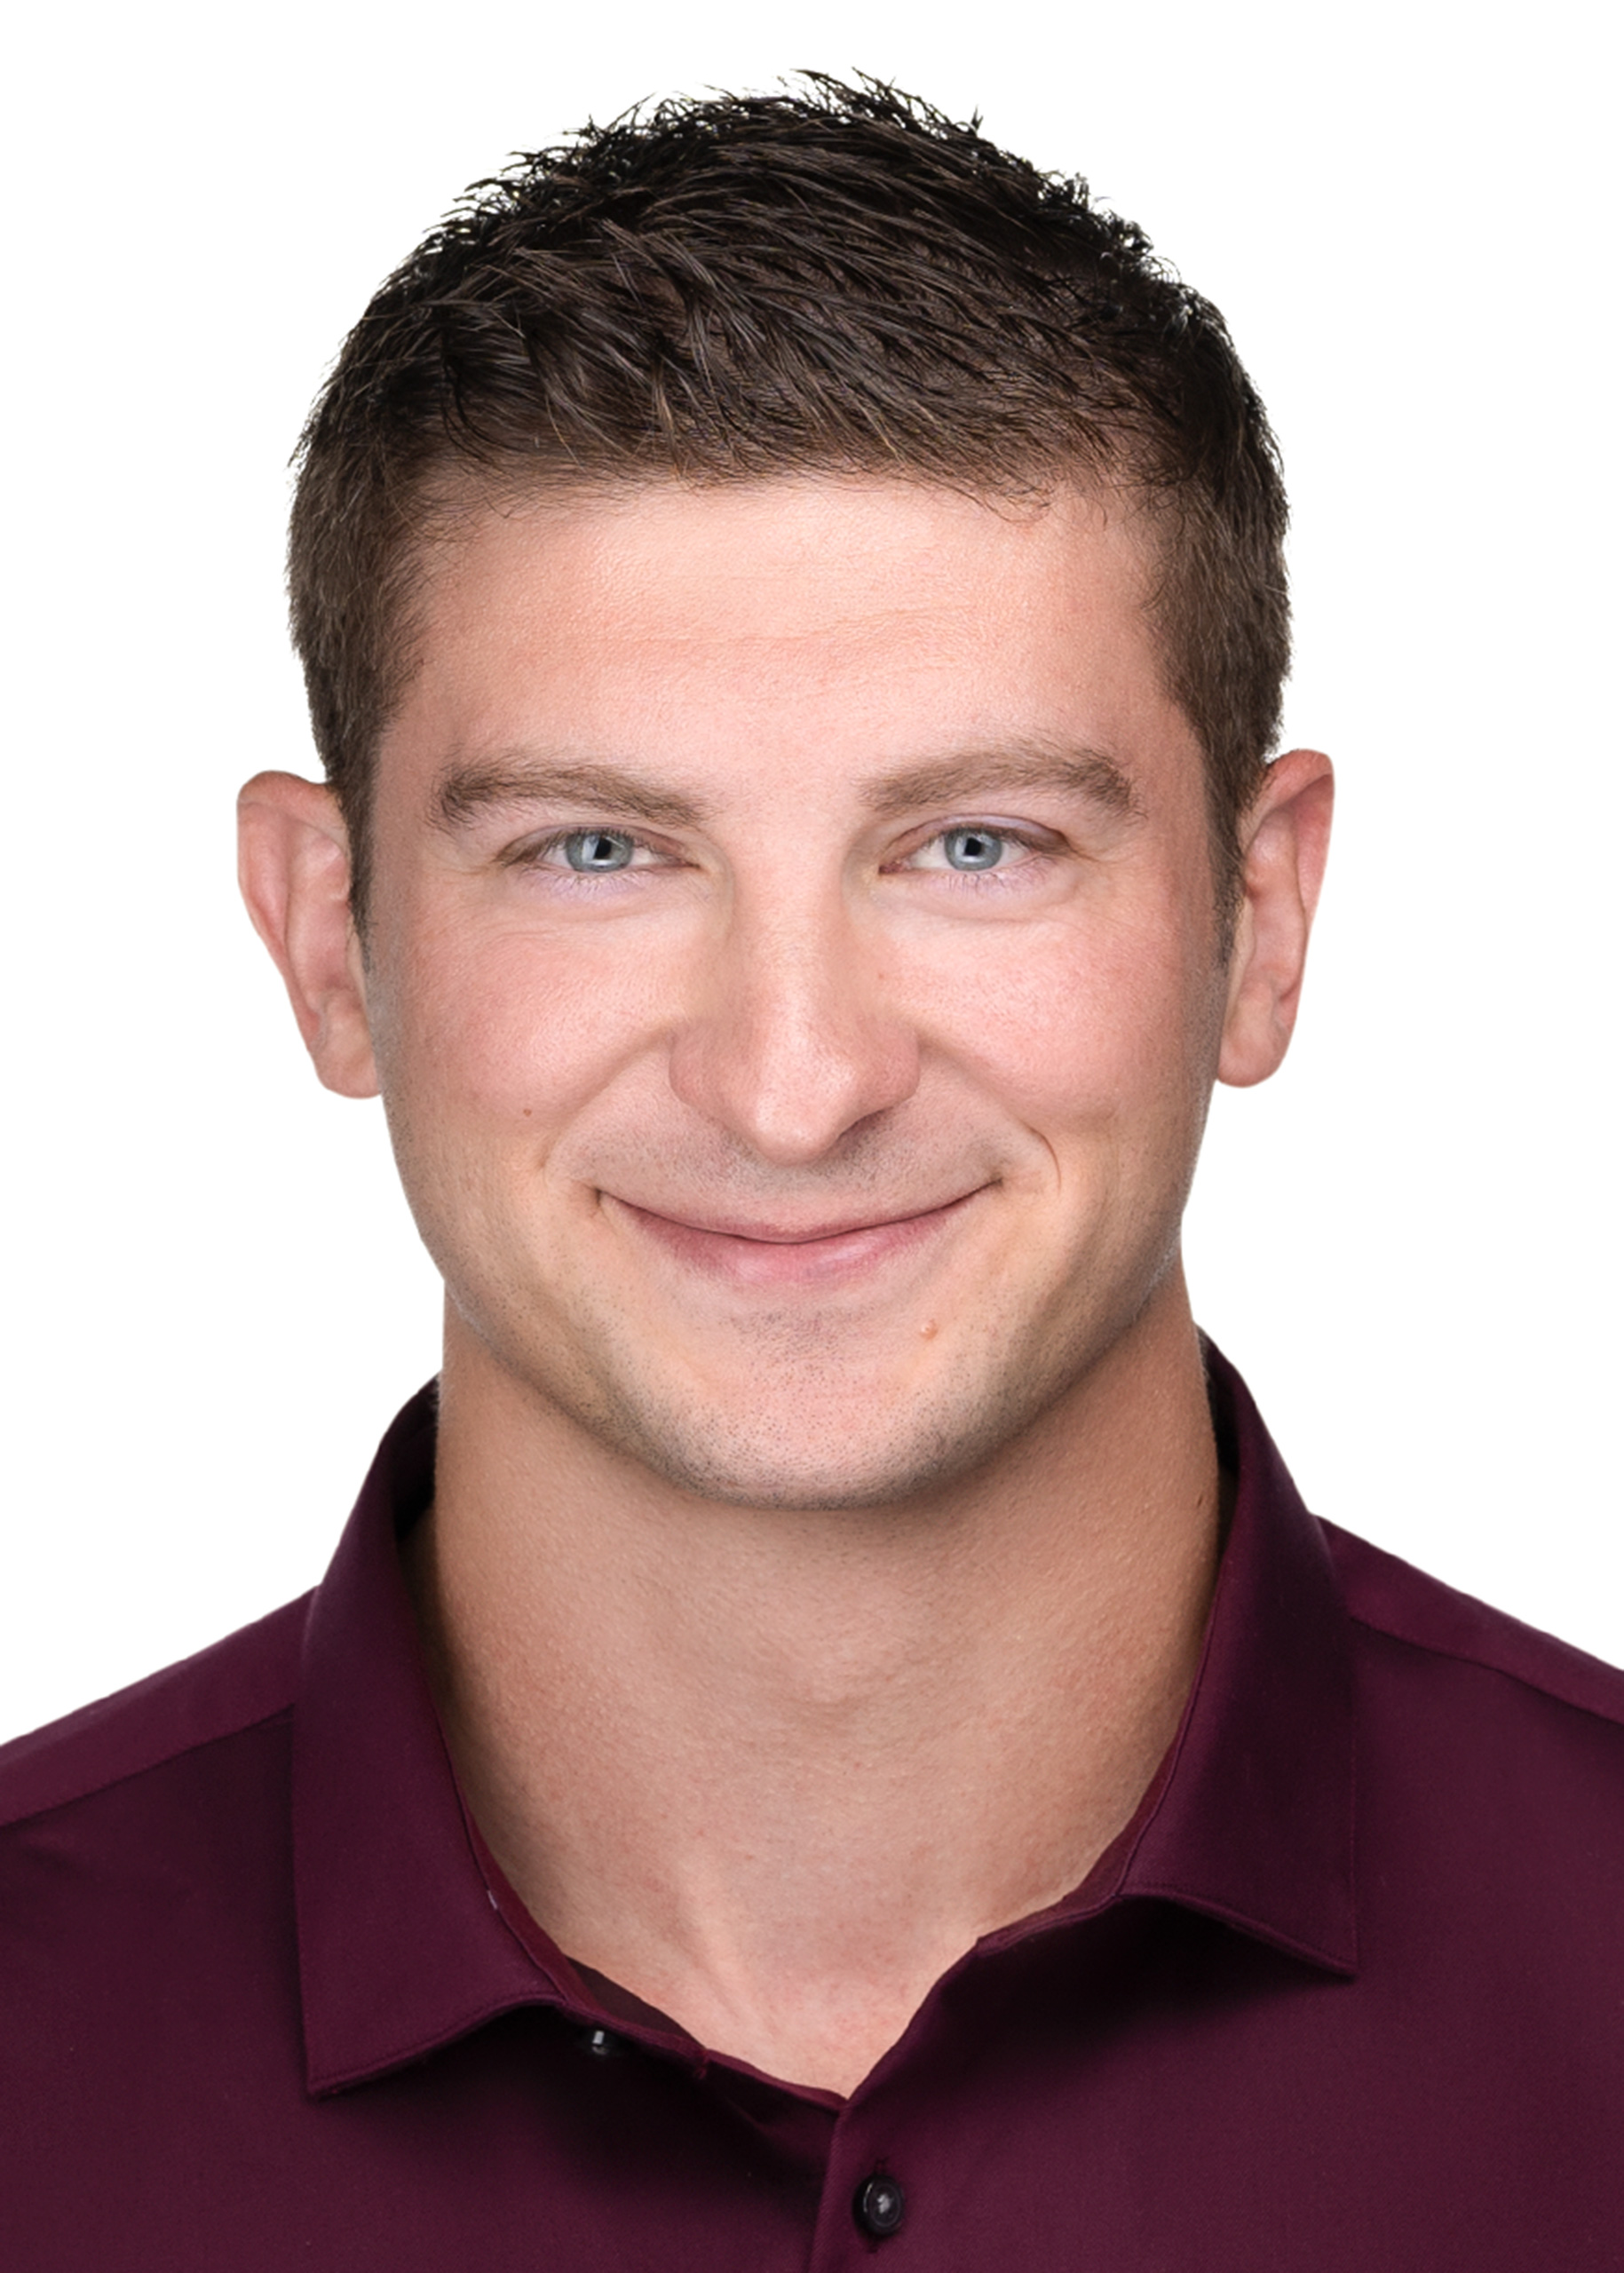 A man in a maroon shirt is smiling for his corporate headshot, showcasing his personal branding.